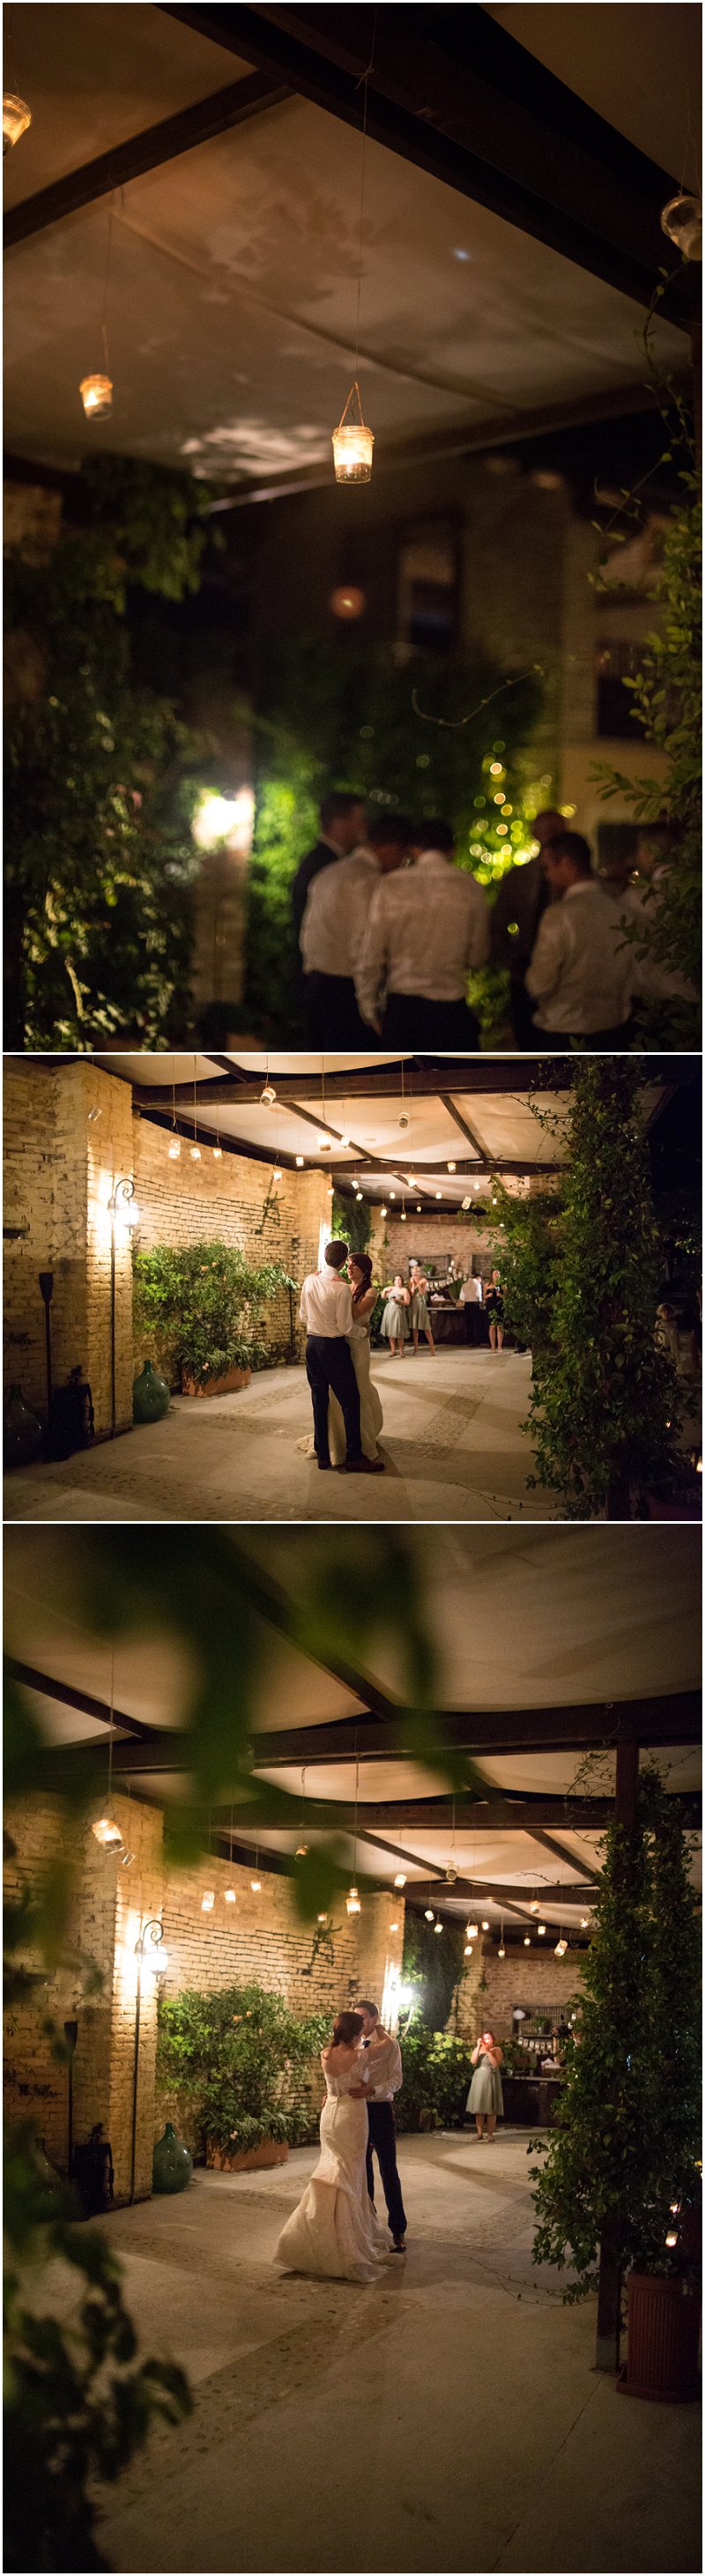 First Dance by Candle Light at La Villa, Piedmont Italy Wedding 